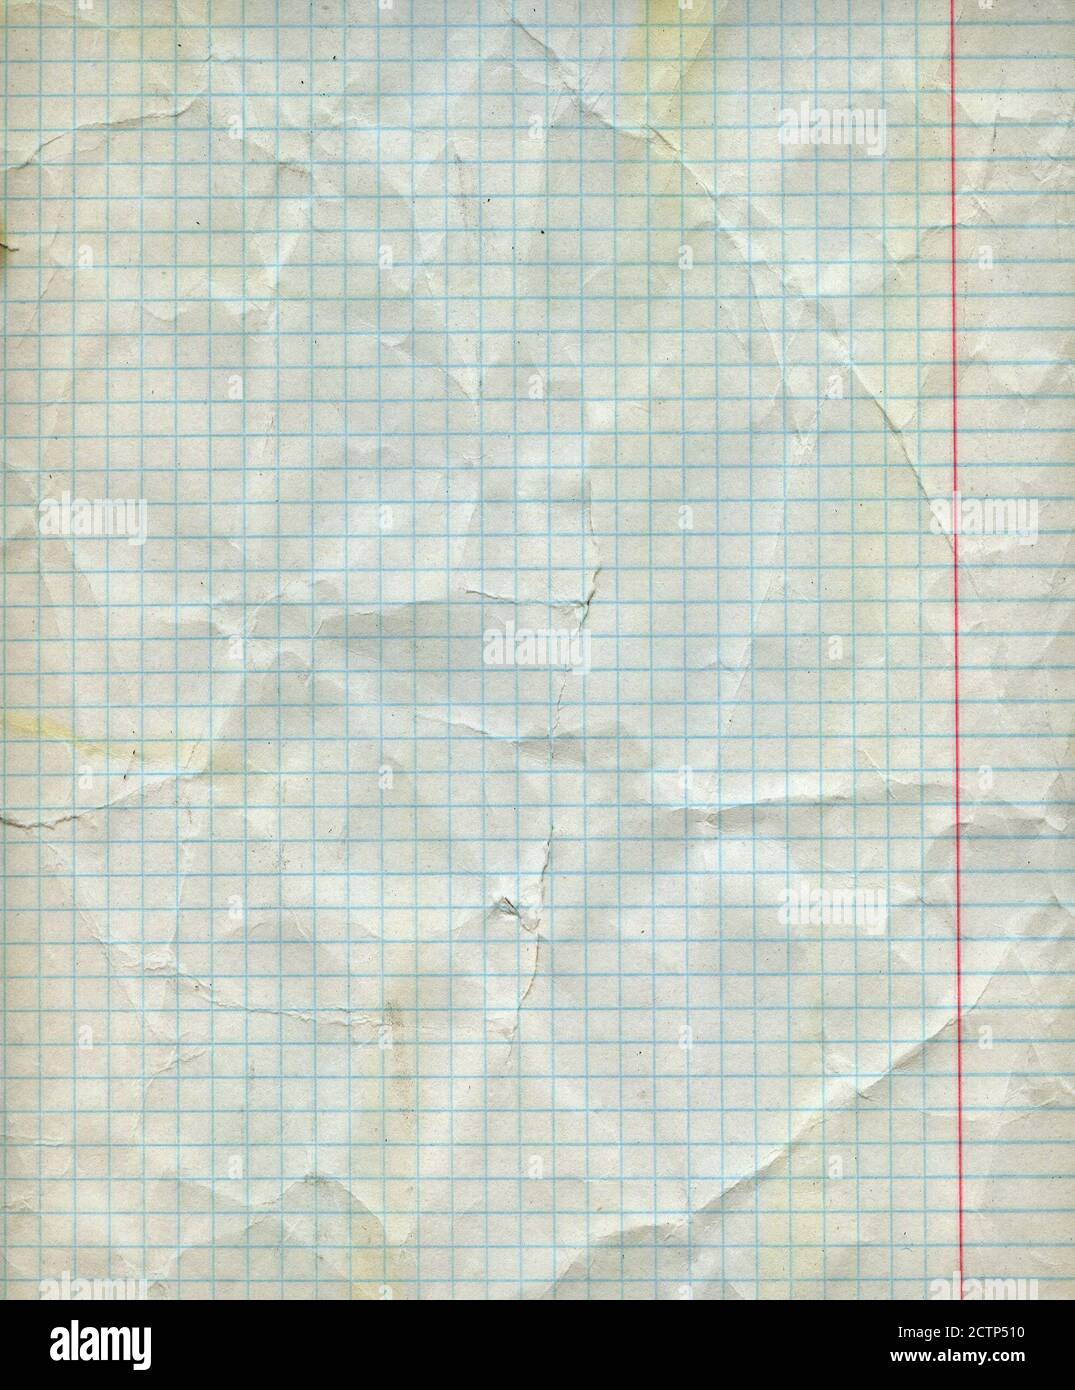 Detailed blank math paper sheet texture with margins. Stock Photo